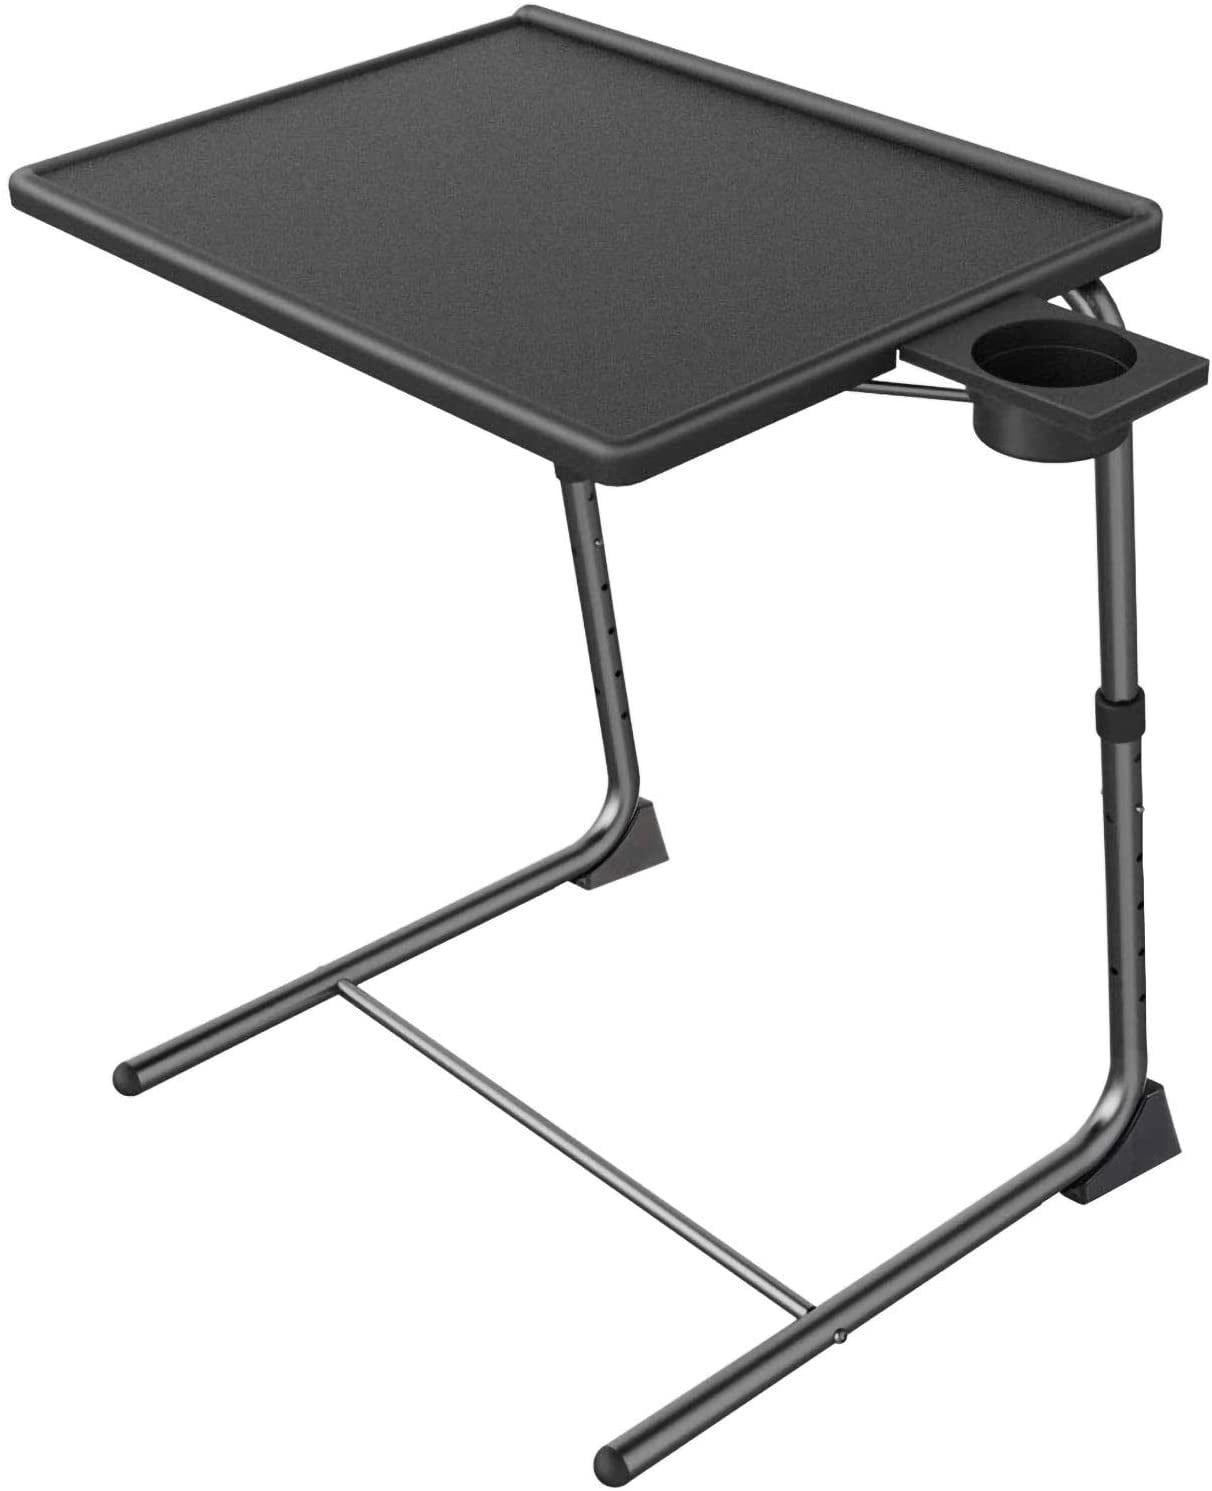 Adjustable Tv Tray Table – Tv Dinner Tray On Bed & Sofa, Comfortable Inside Foldable Portable Adjustable Tv Stands (View 14 of 20)